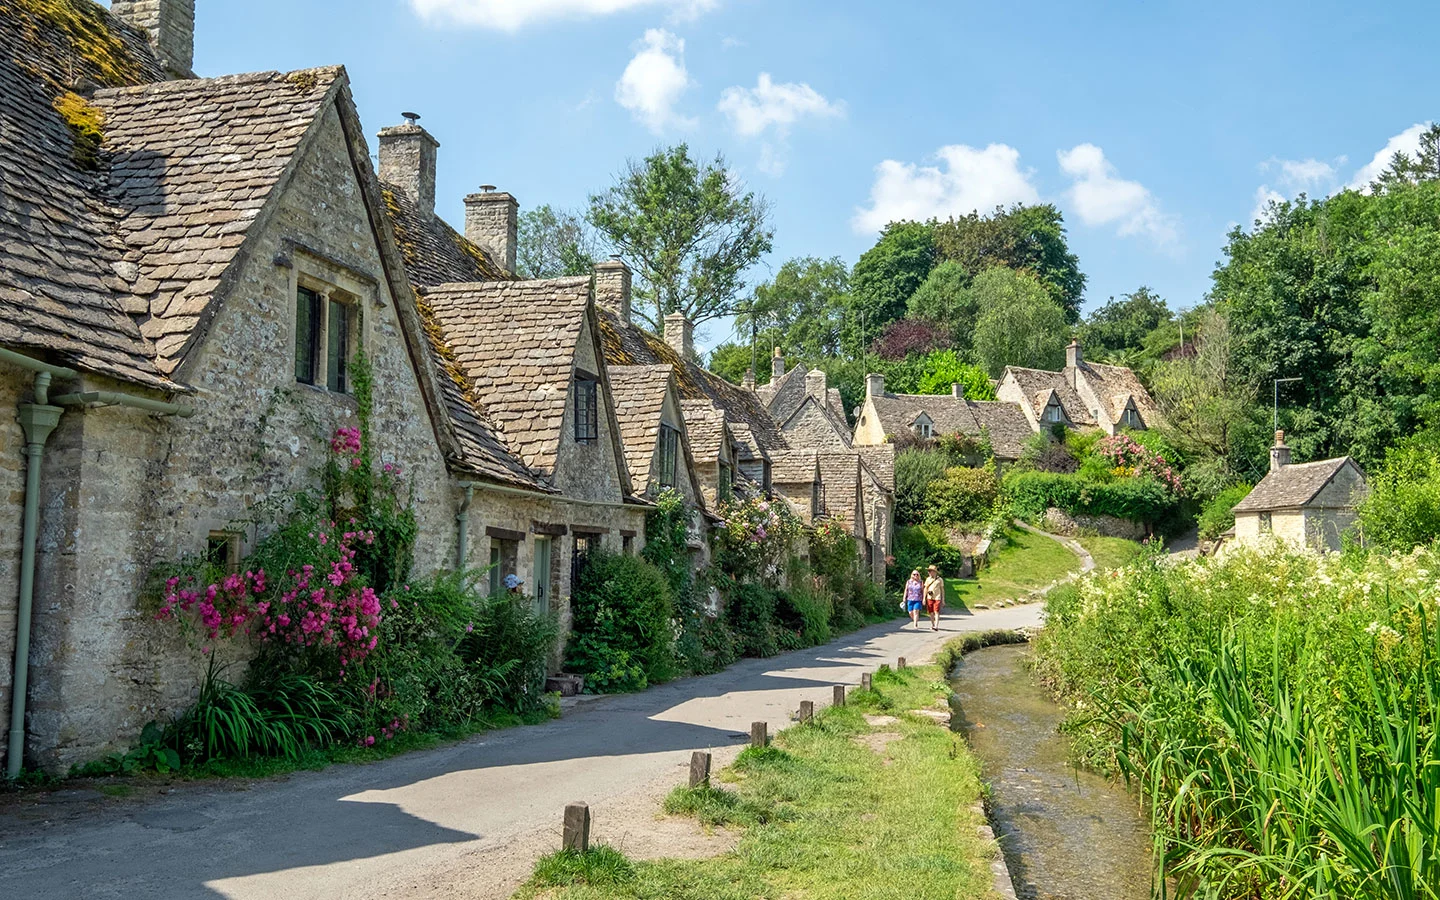 Arlington Row cottages in Bibury in the Cotswolds